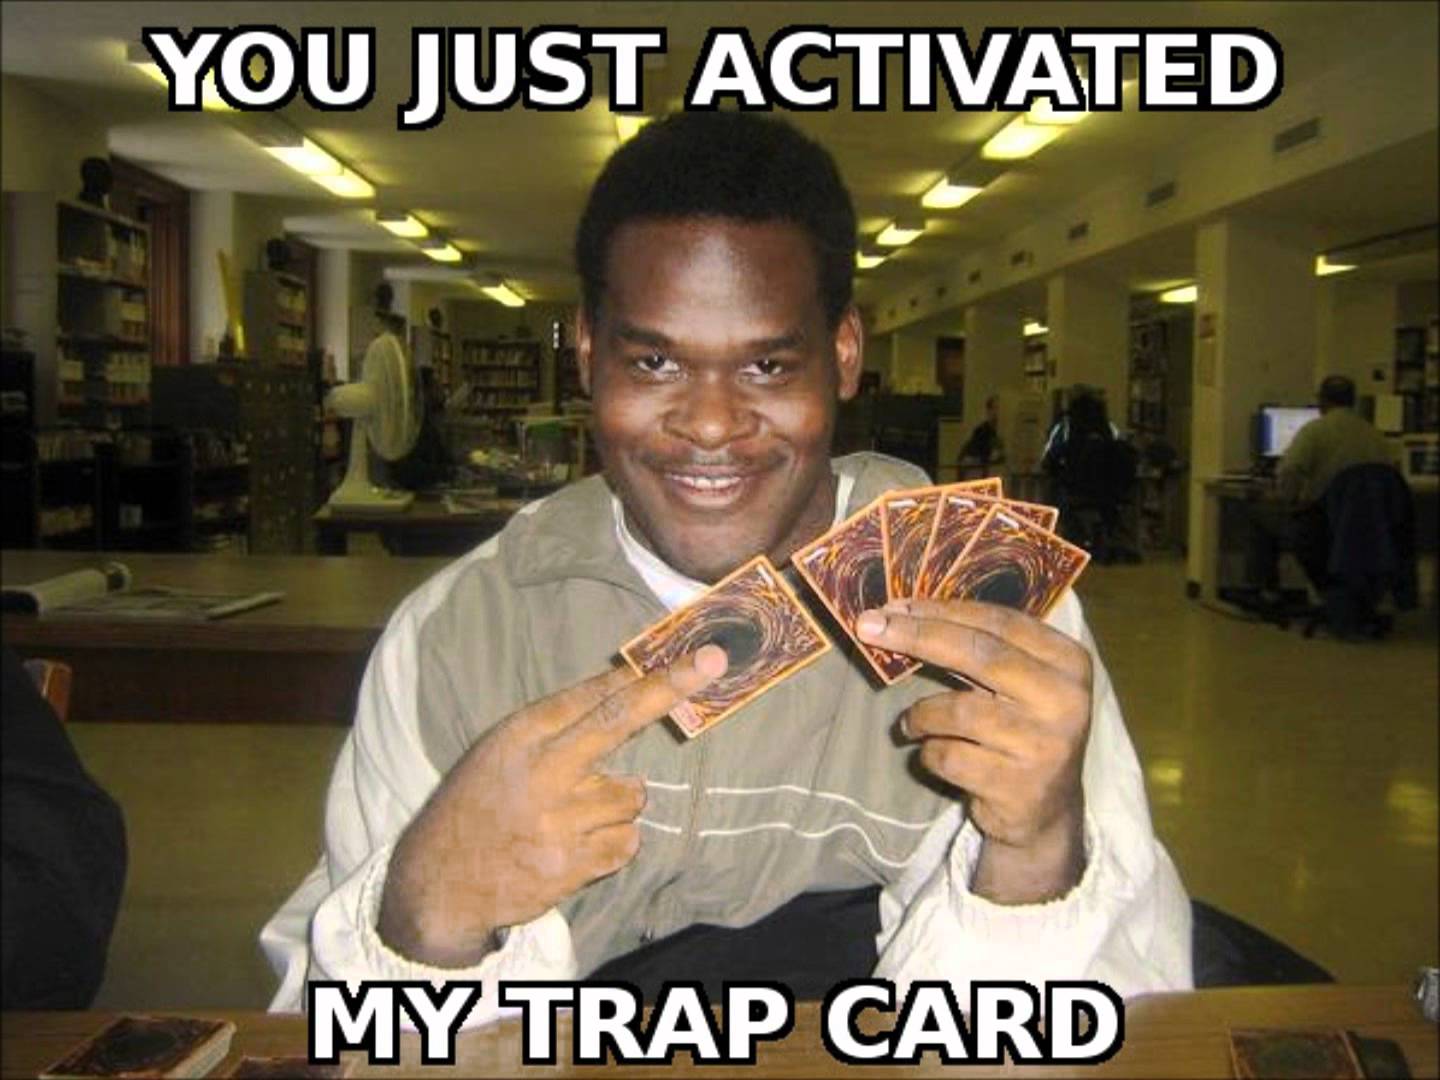 You just need some. You just activated my Trap Card. You activated my Trap Card. You Fool you activated my Trap Card. Trap Card meme.